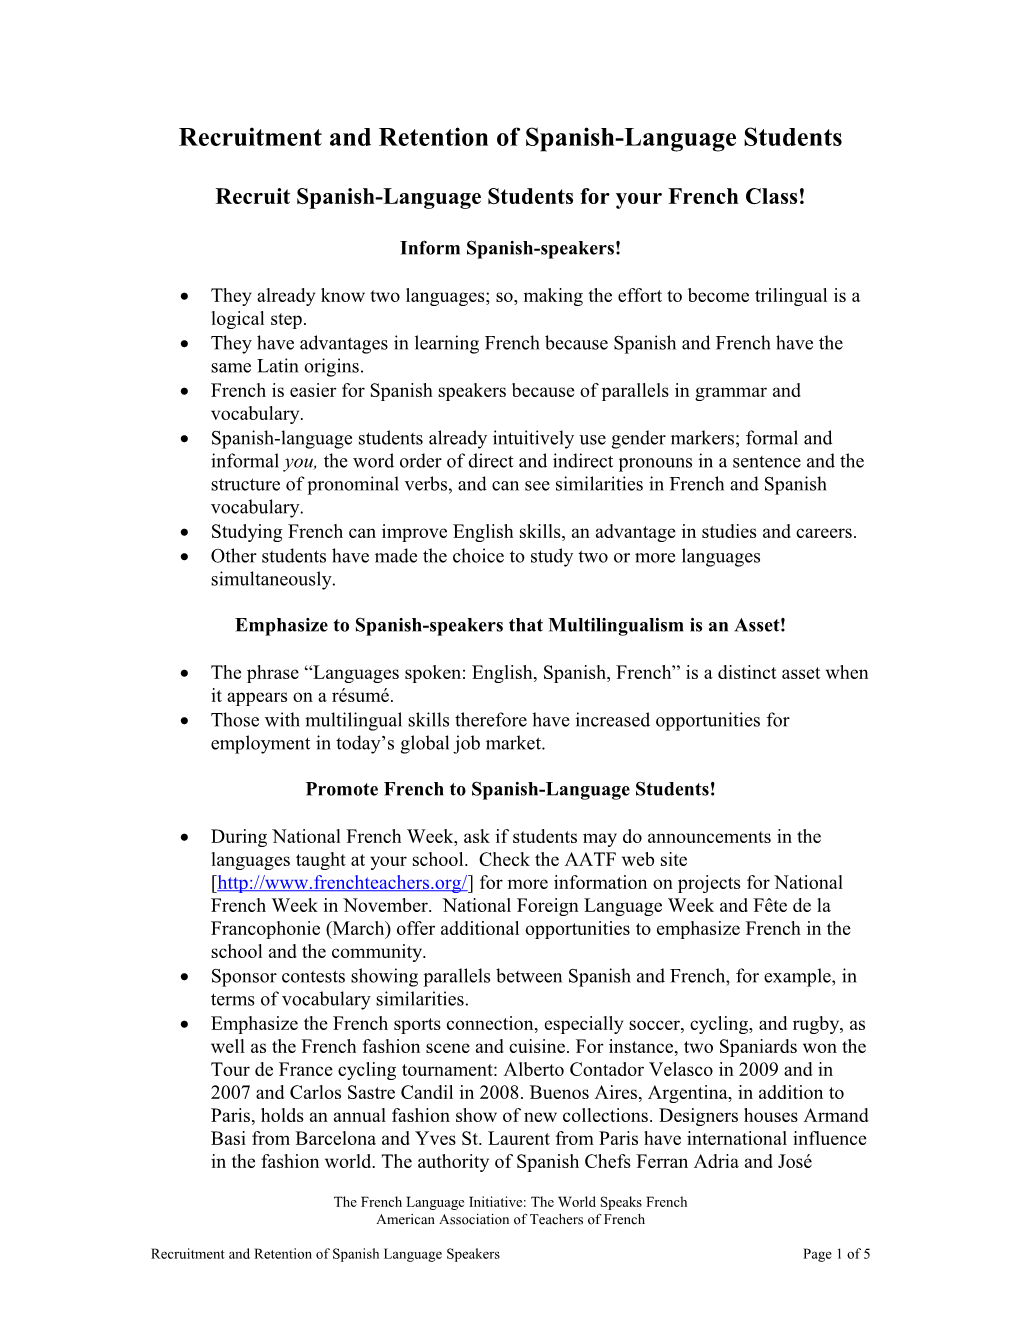 Recruit Spanish-Language Students for Your French Class